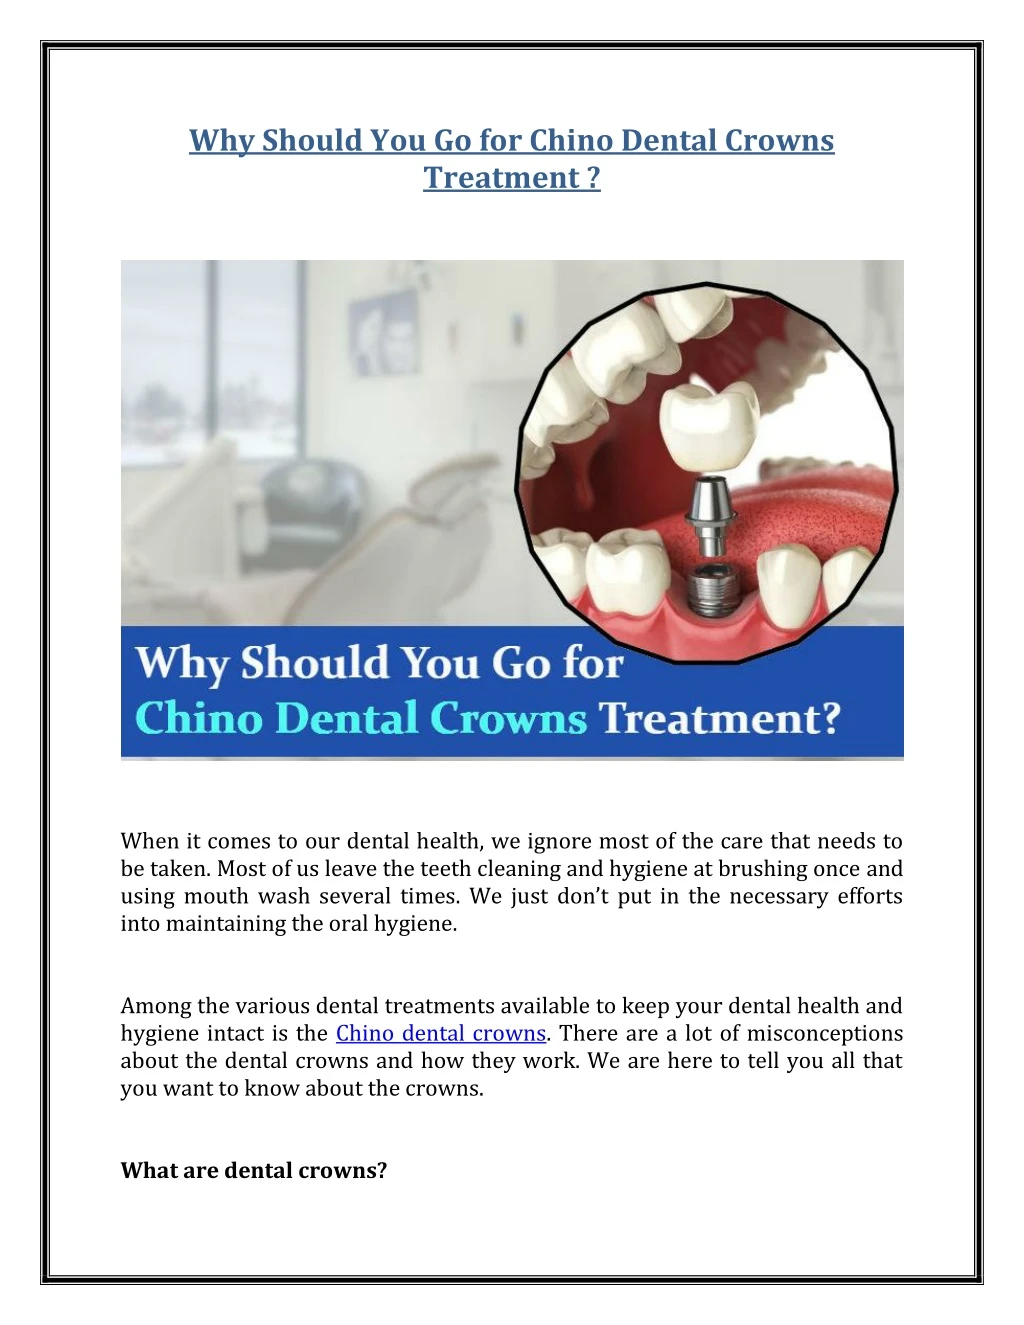 why should you go for chino dental crowns